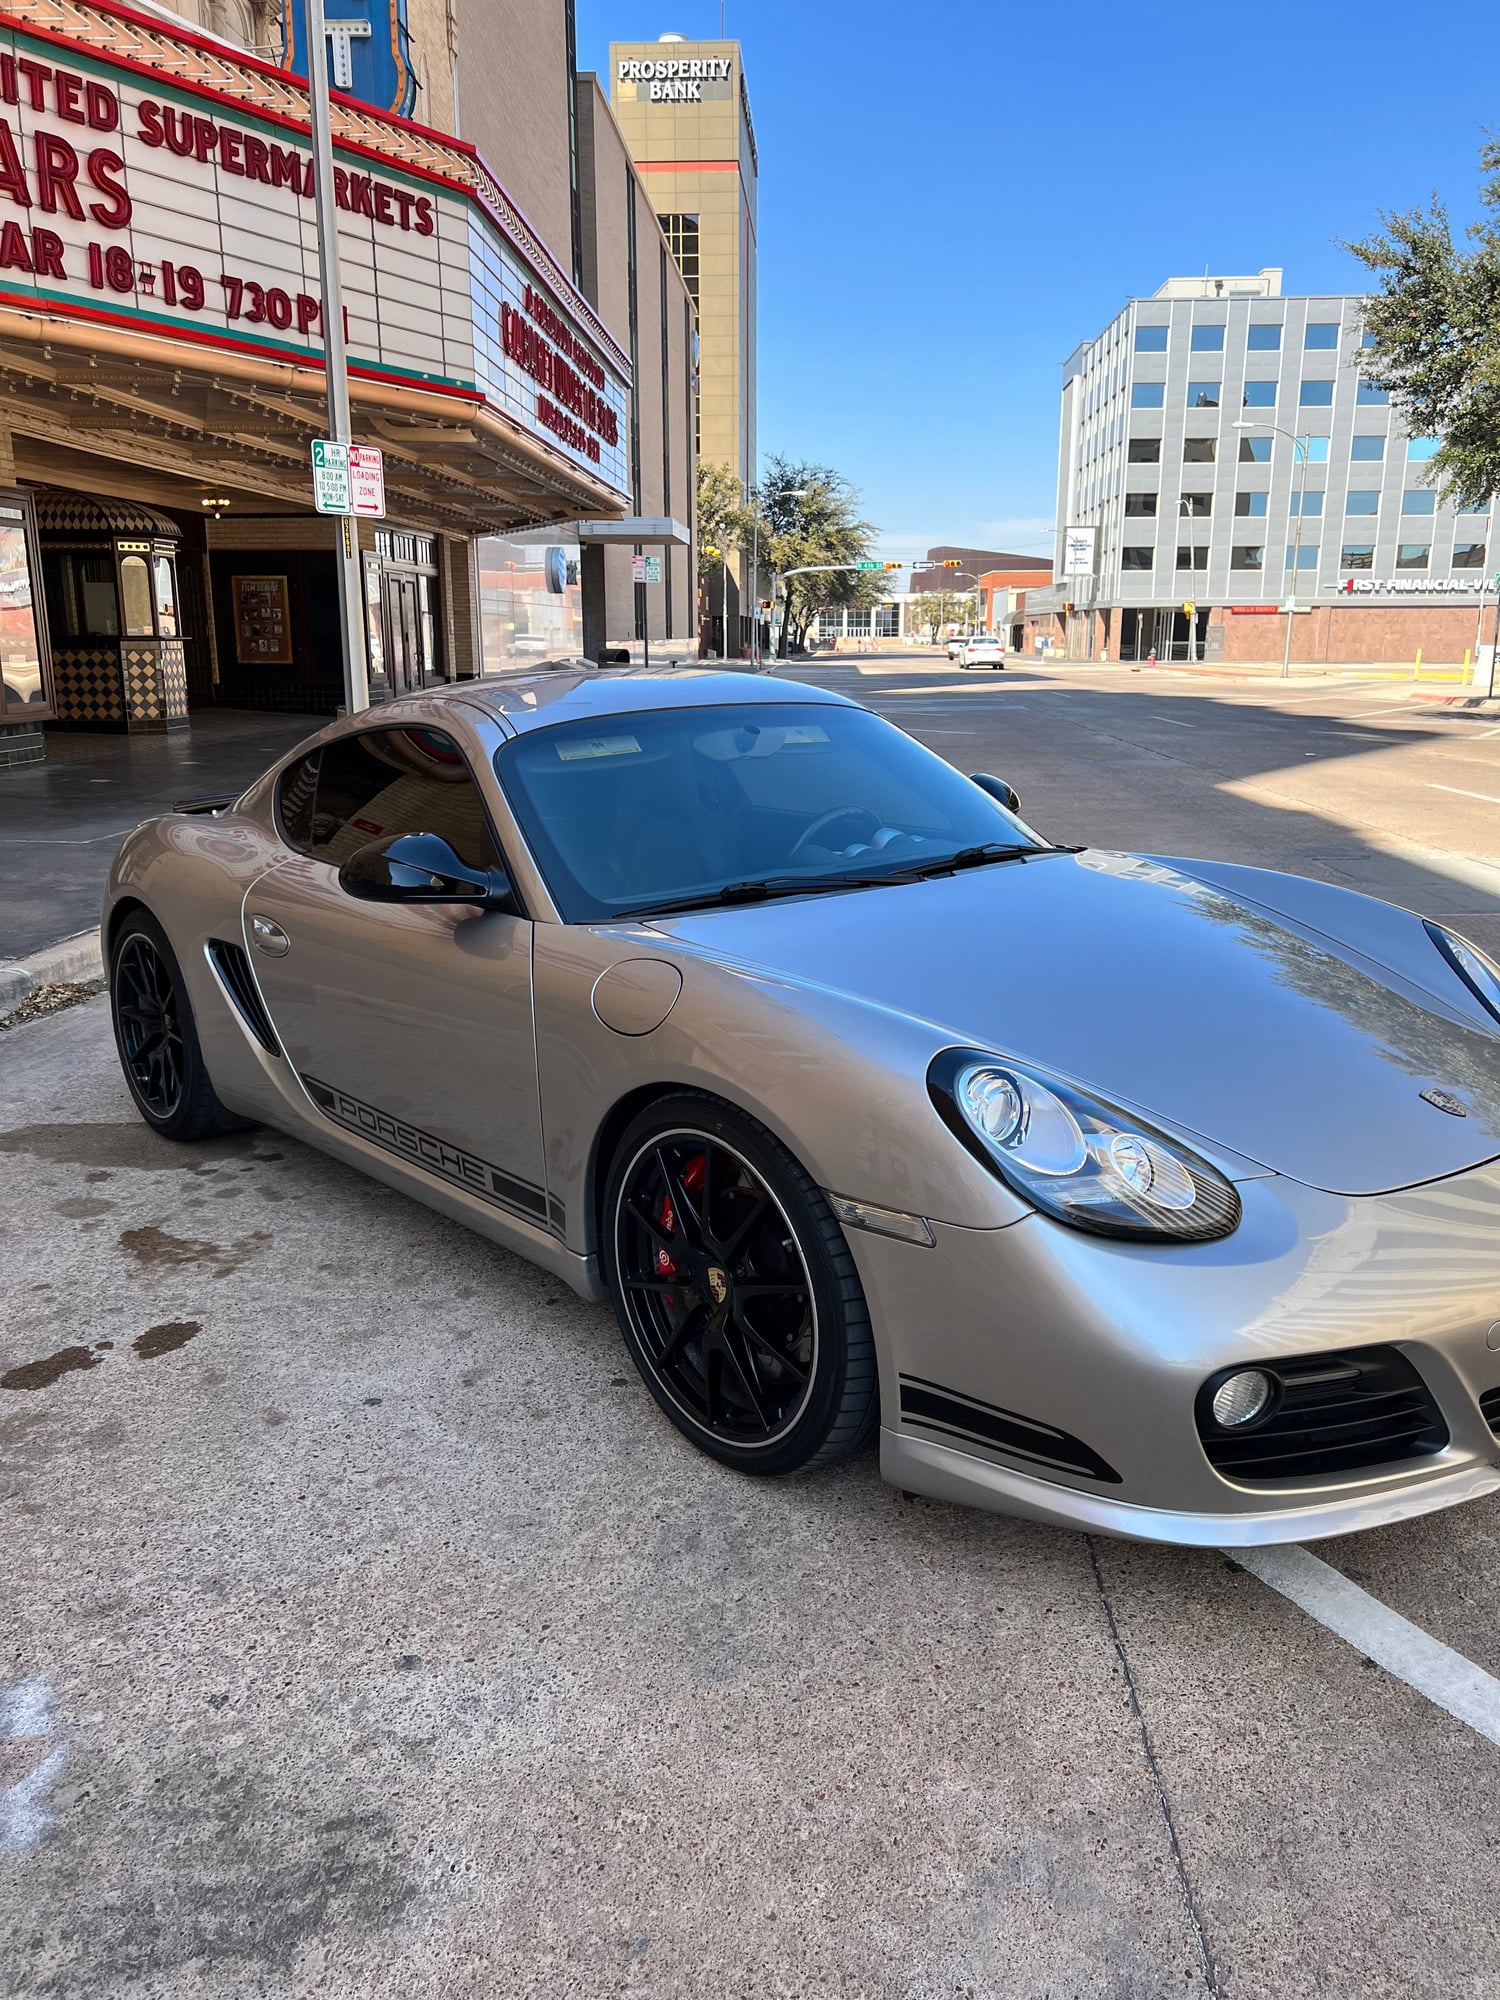 2012 Porsche Cayman - Modified F6I/Raby 2012 Cayman R - Used - VIN WP0AB2A8XCS793377 - 73,000 Miles - 6 cyl - 2WD - Automatic - Coupe - Silver - Houston, TX 77459, United States